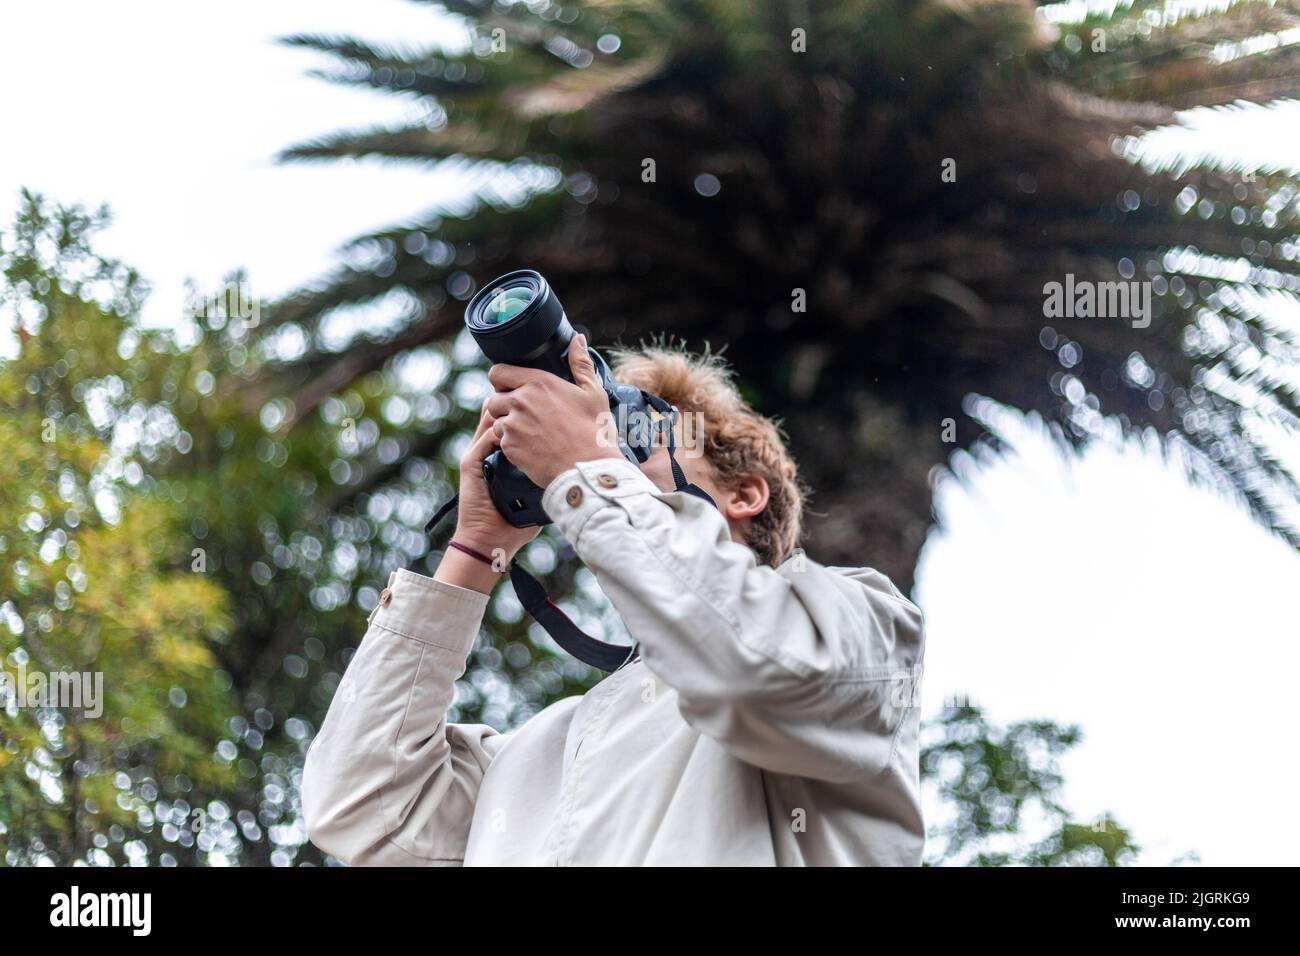 Blond traveler man taking a picture in the nature Stock Photo